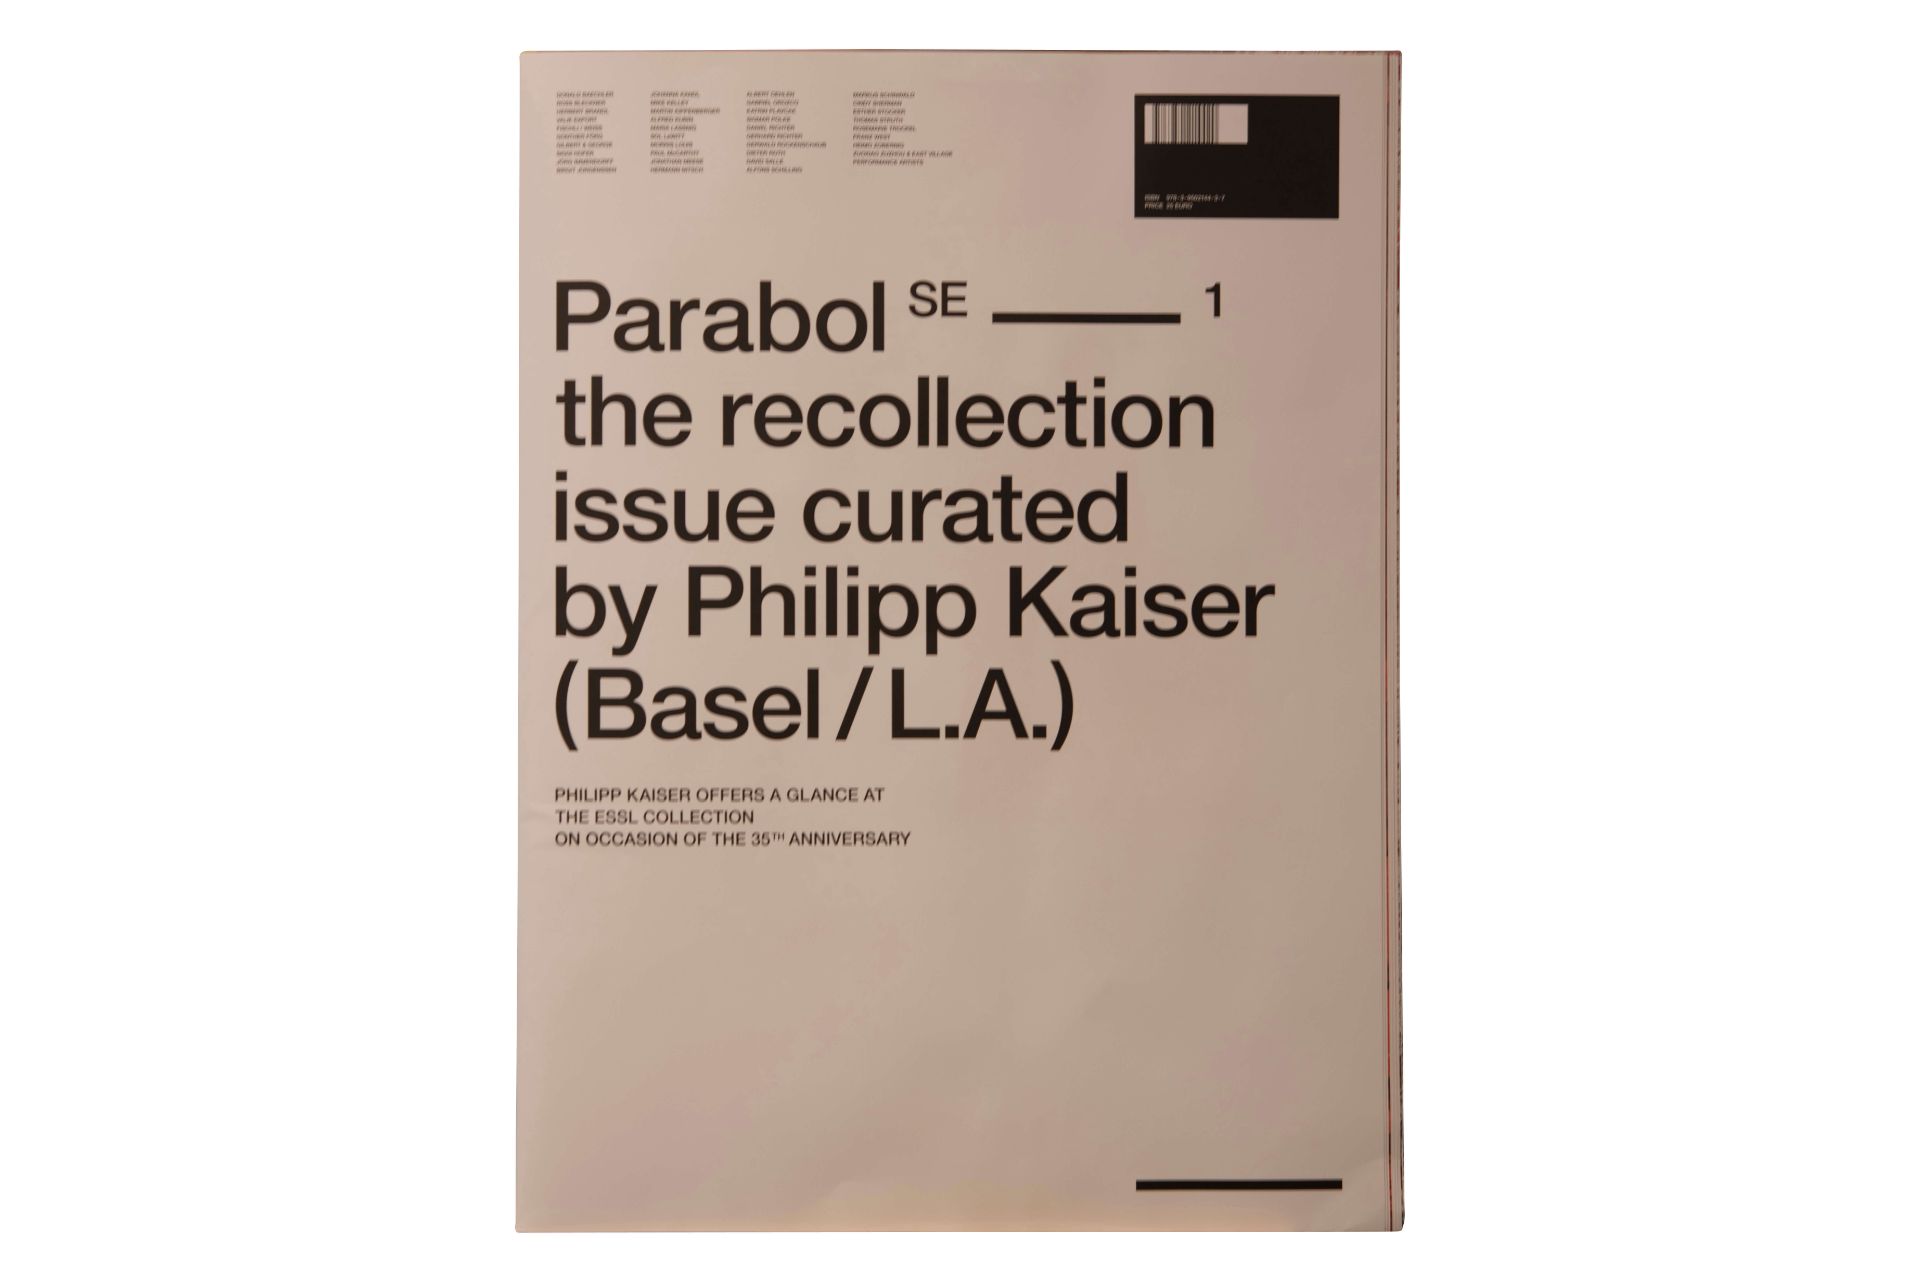 Parabol SE. The recollection issue curated by Philipp Kaiser (Basel/L.A.). | Parabol SE. The Recolle